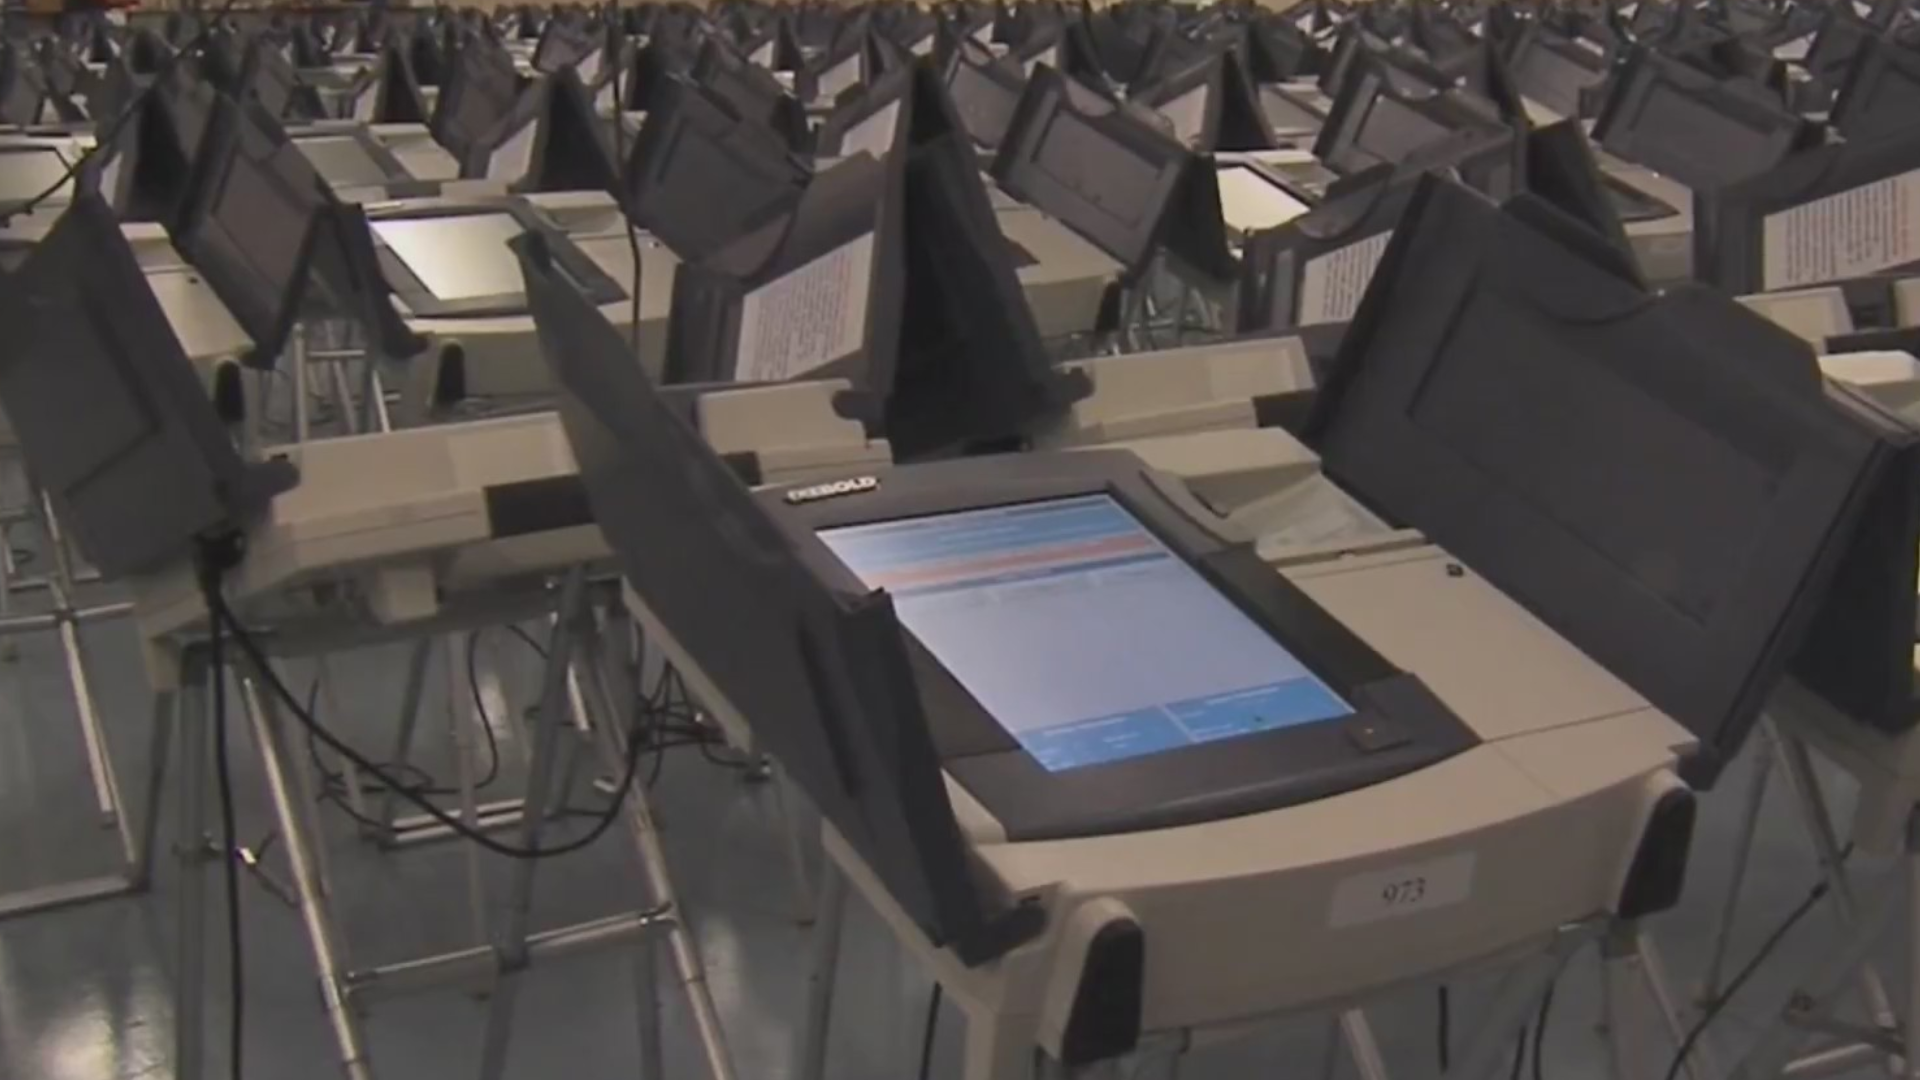 Out with the old, in with the new, decisions are being made about new voting machines for Shelby County